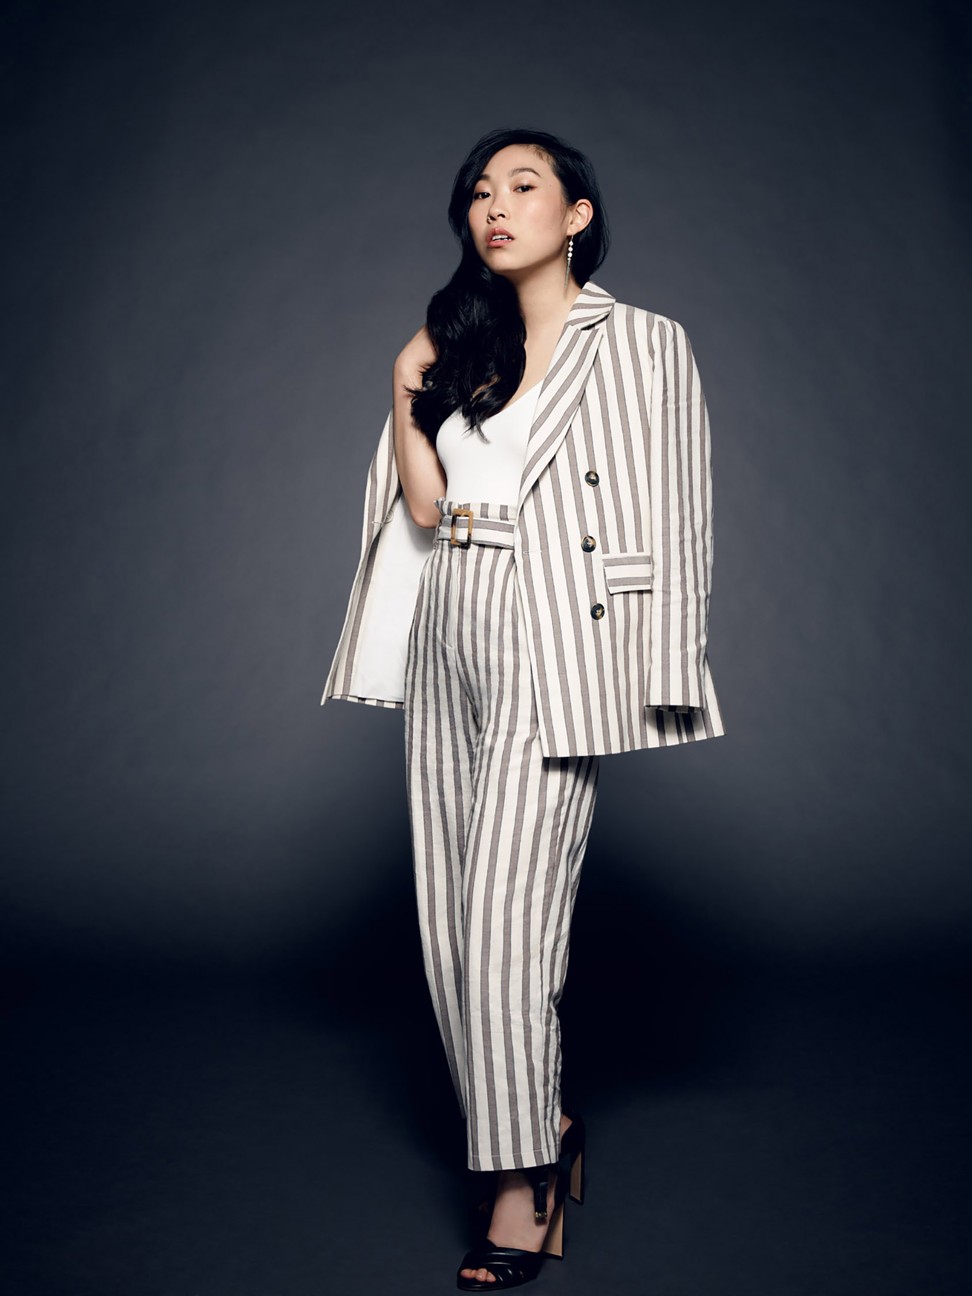 “I’ve been watching Comedy Central since I was old enough to hold a remote,” says Awkwafina. Photo: Art Strieber/Courtesy Warner Bros. Pictures